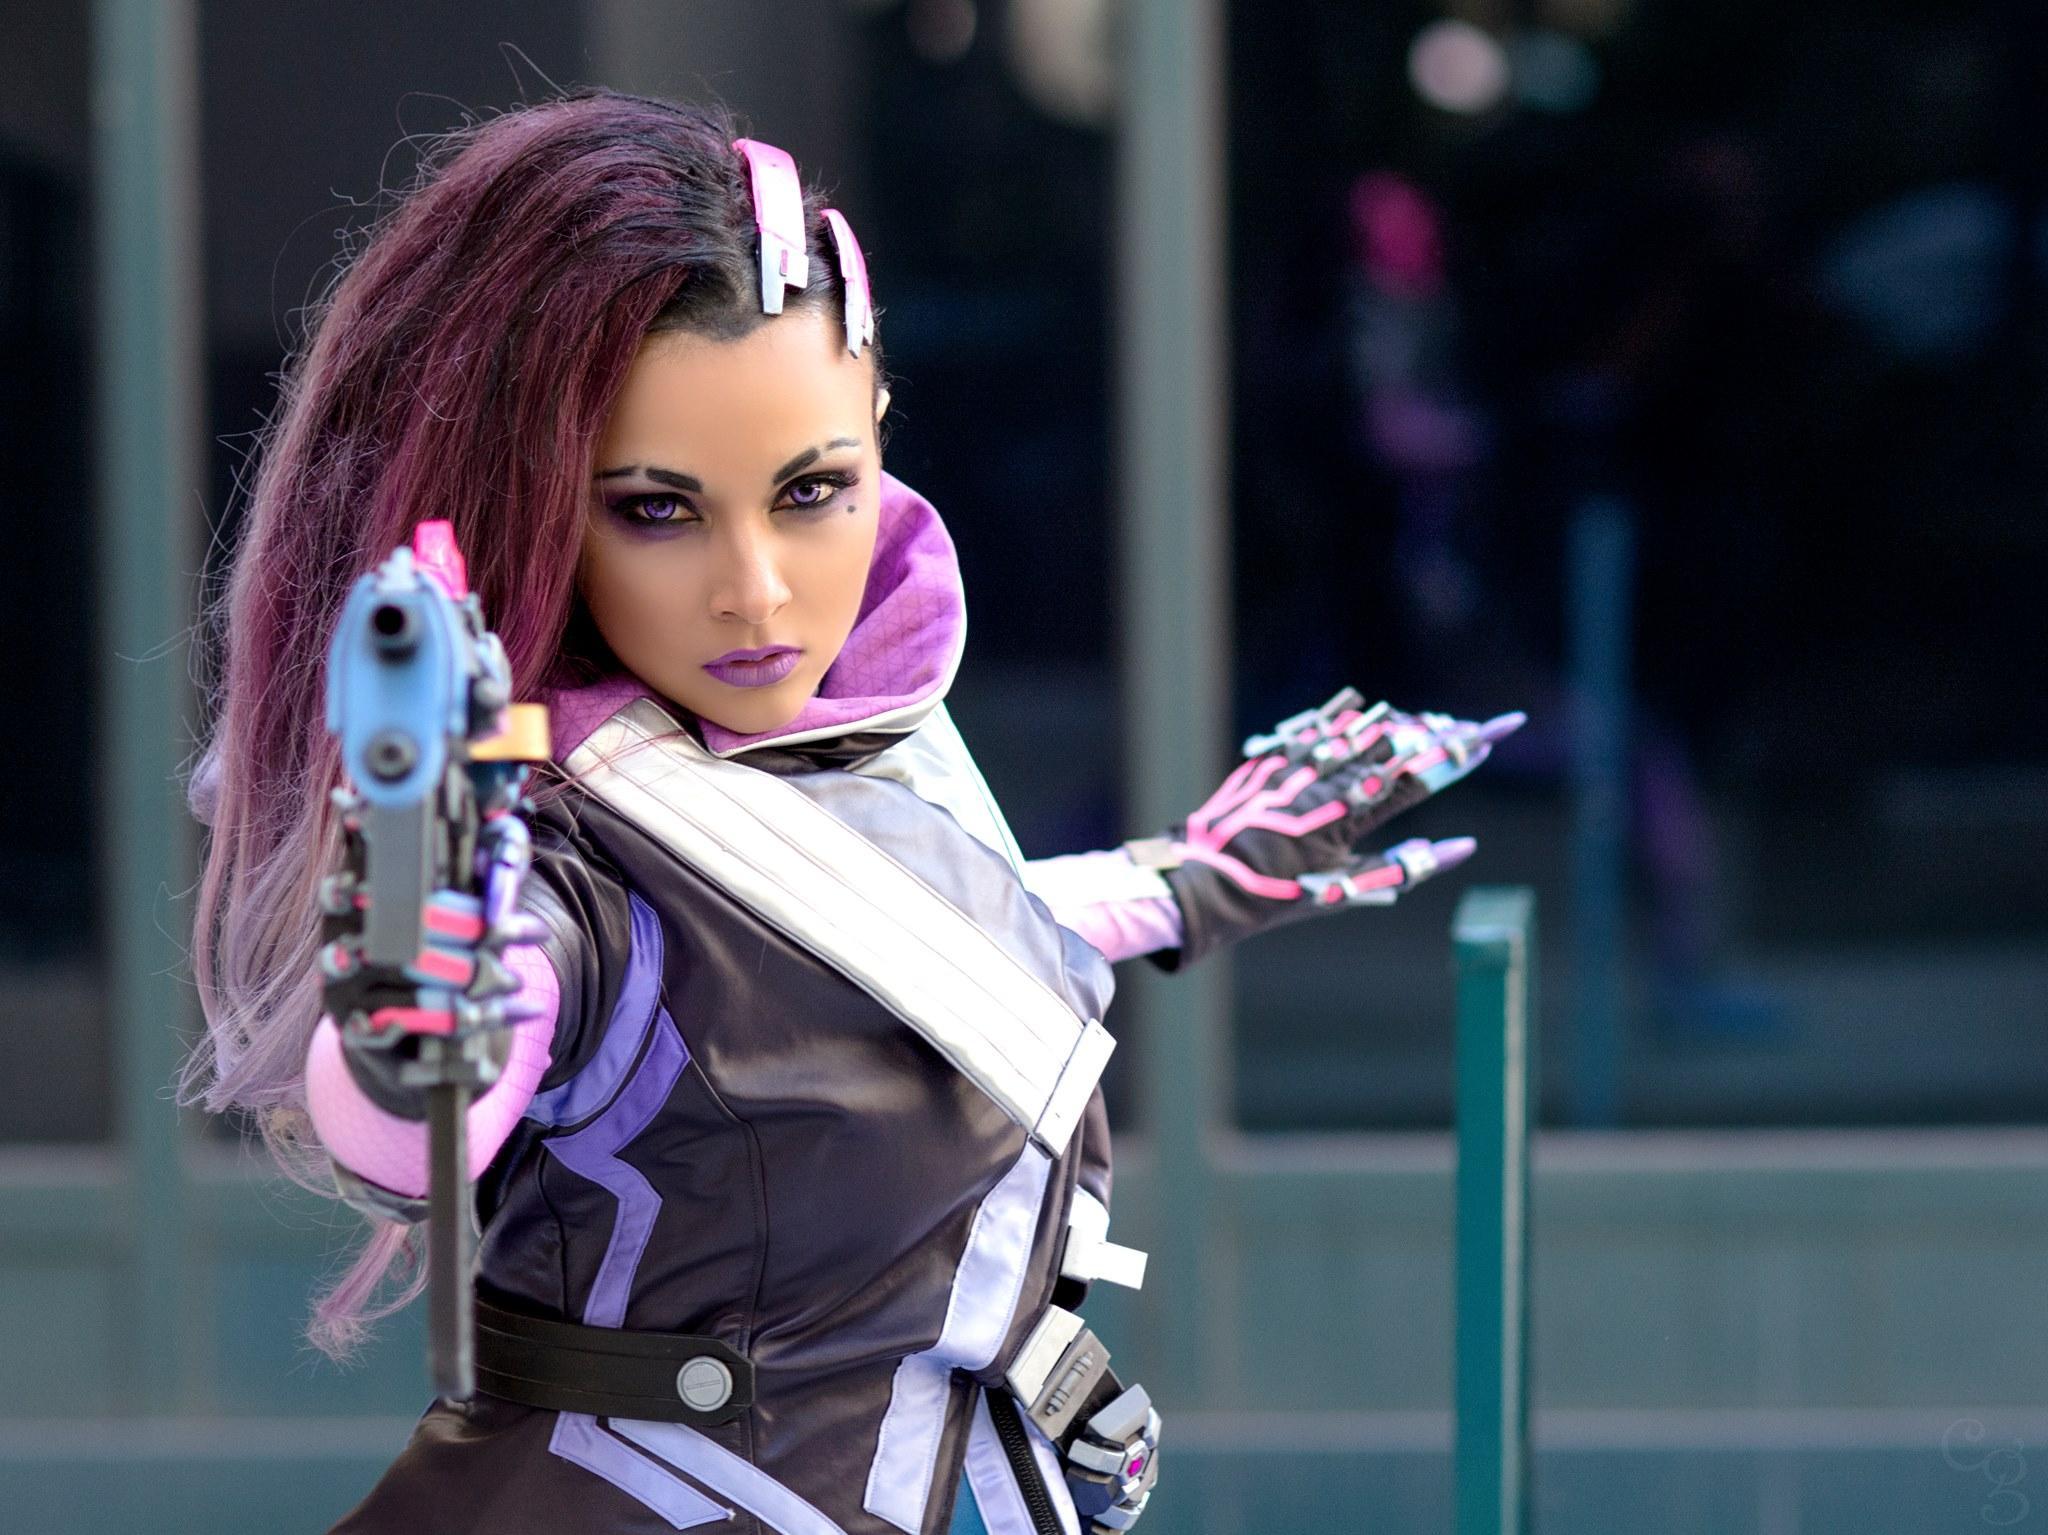 50+ Hot Pictures Of Sombra From Overwatch | Best Of Comic Books